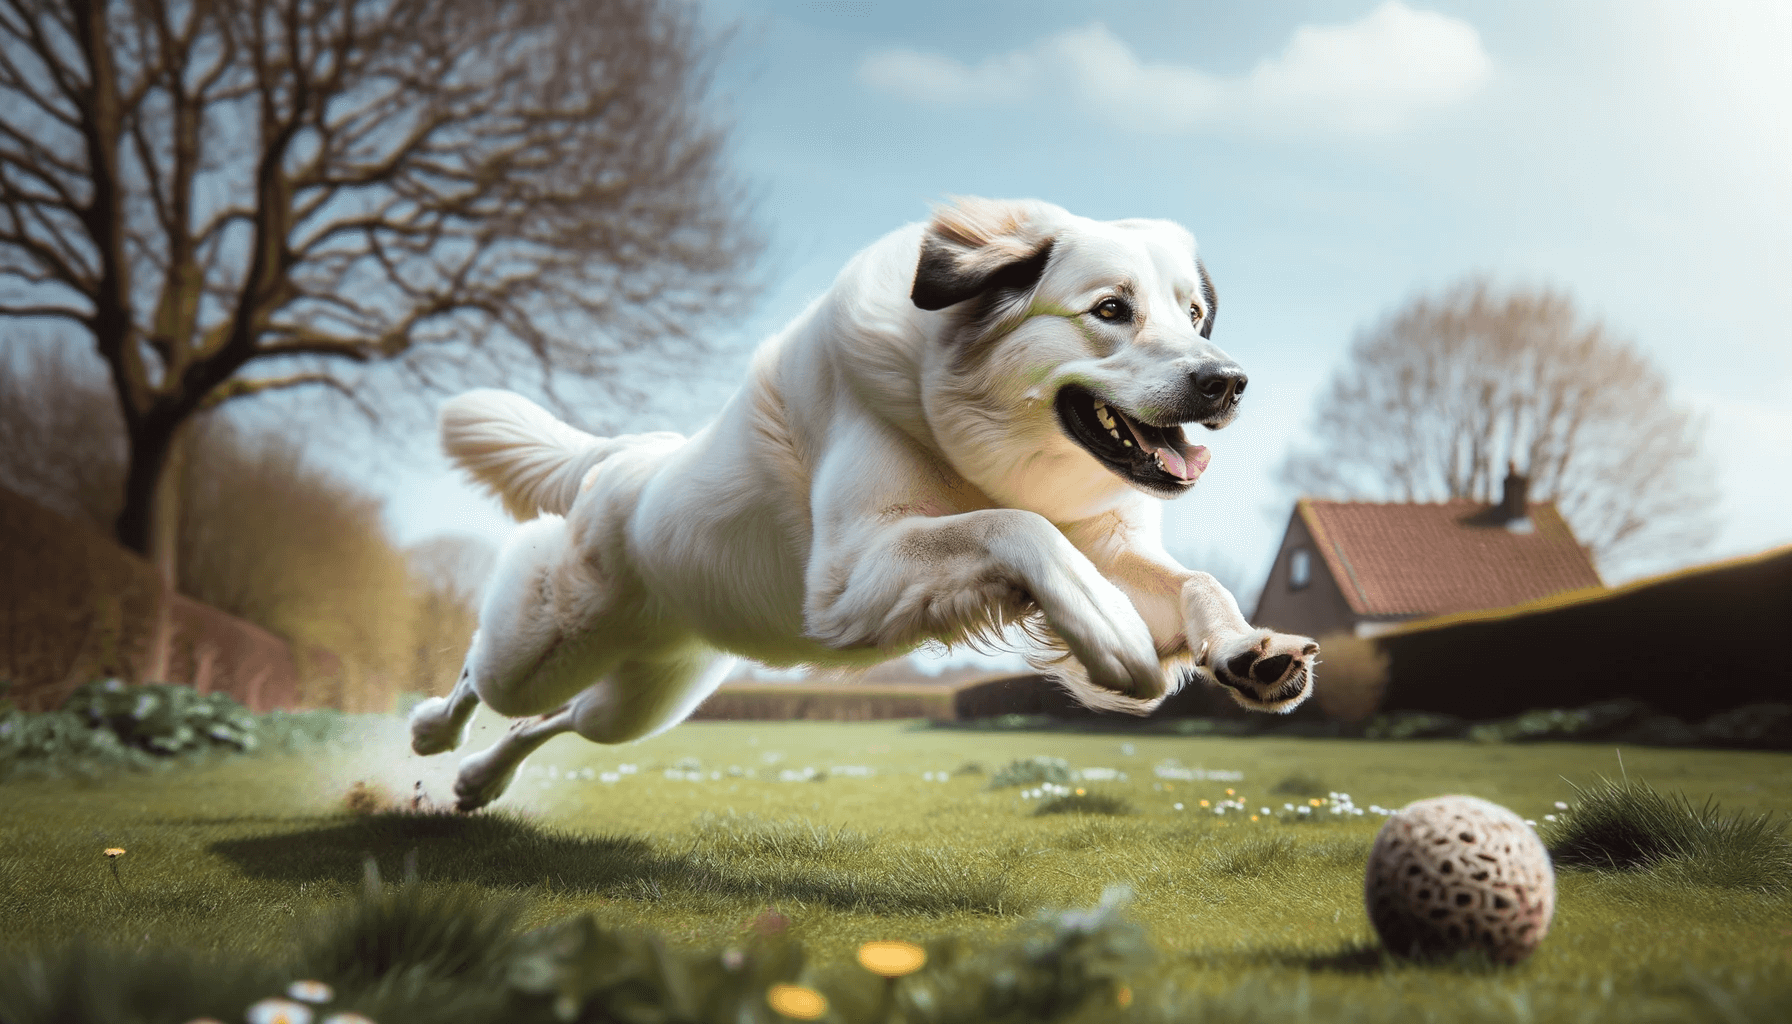 Great Pyrenees Lab Mix looking like an Olympic sprinter while chasing a ball